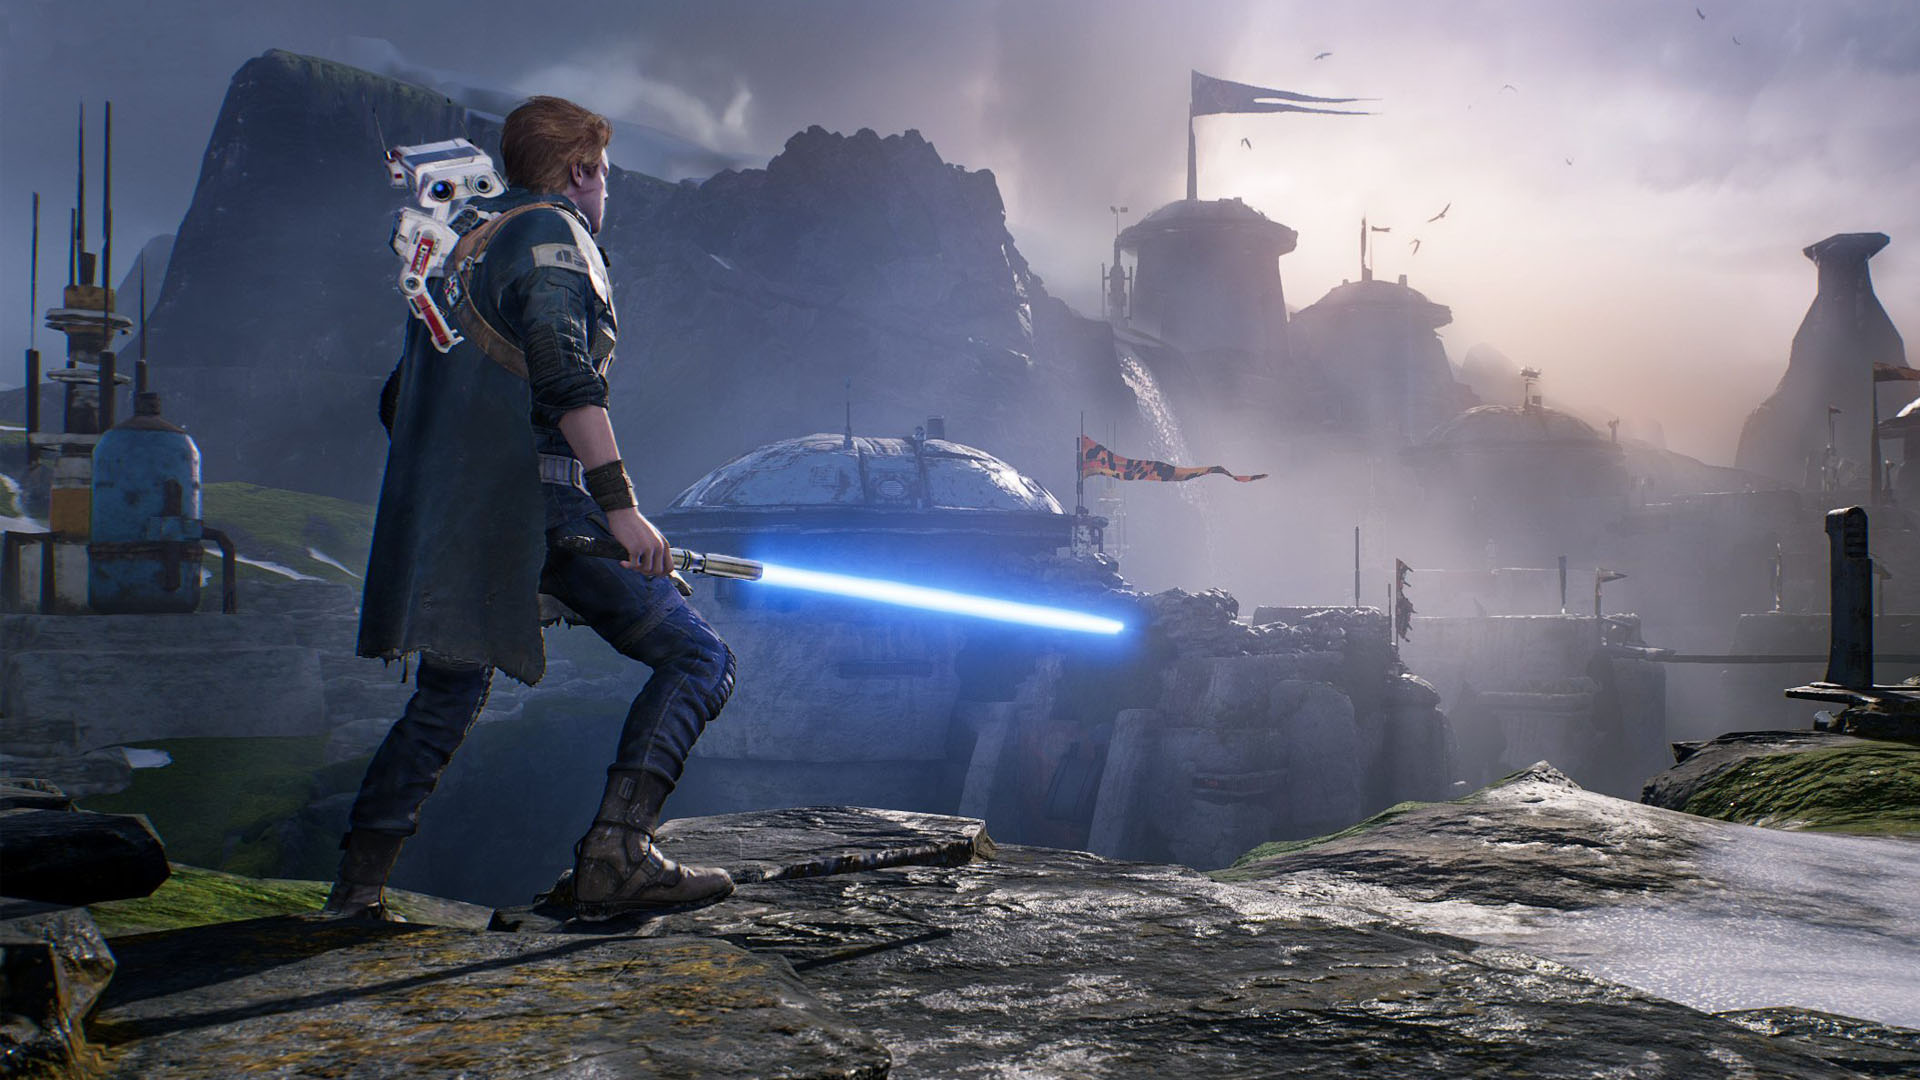 Star Wars Jedi: Fallen Order is Now Available for Xbox Series X|S and PS5